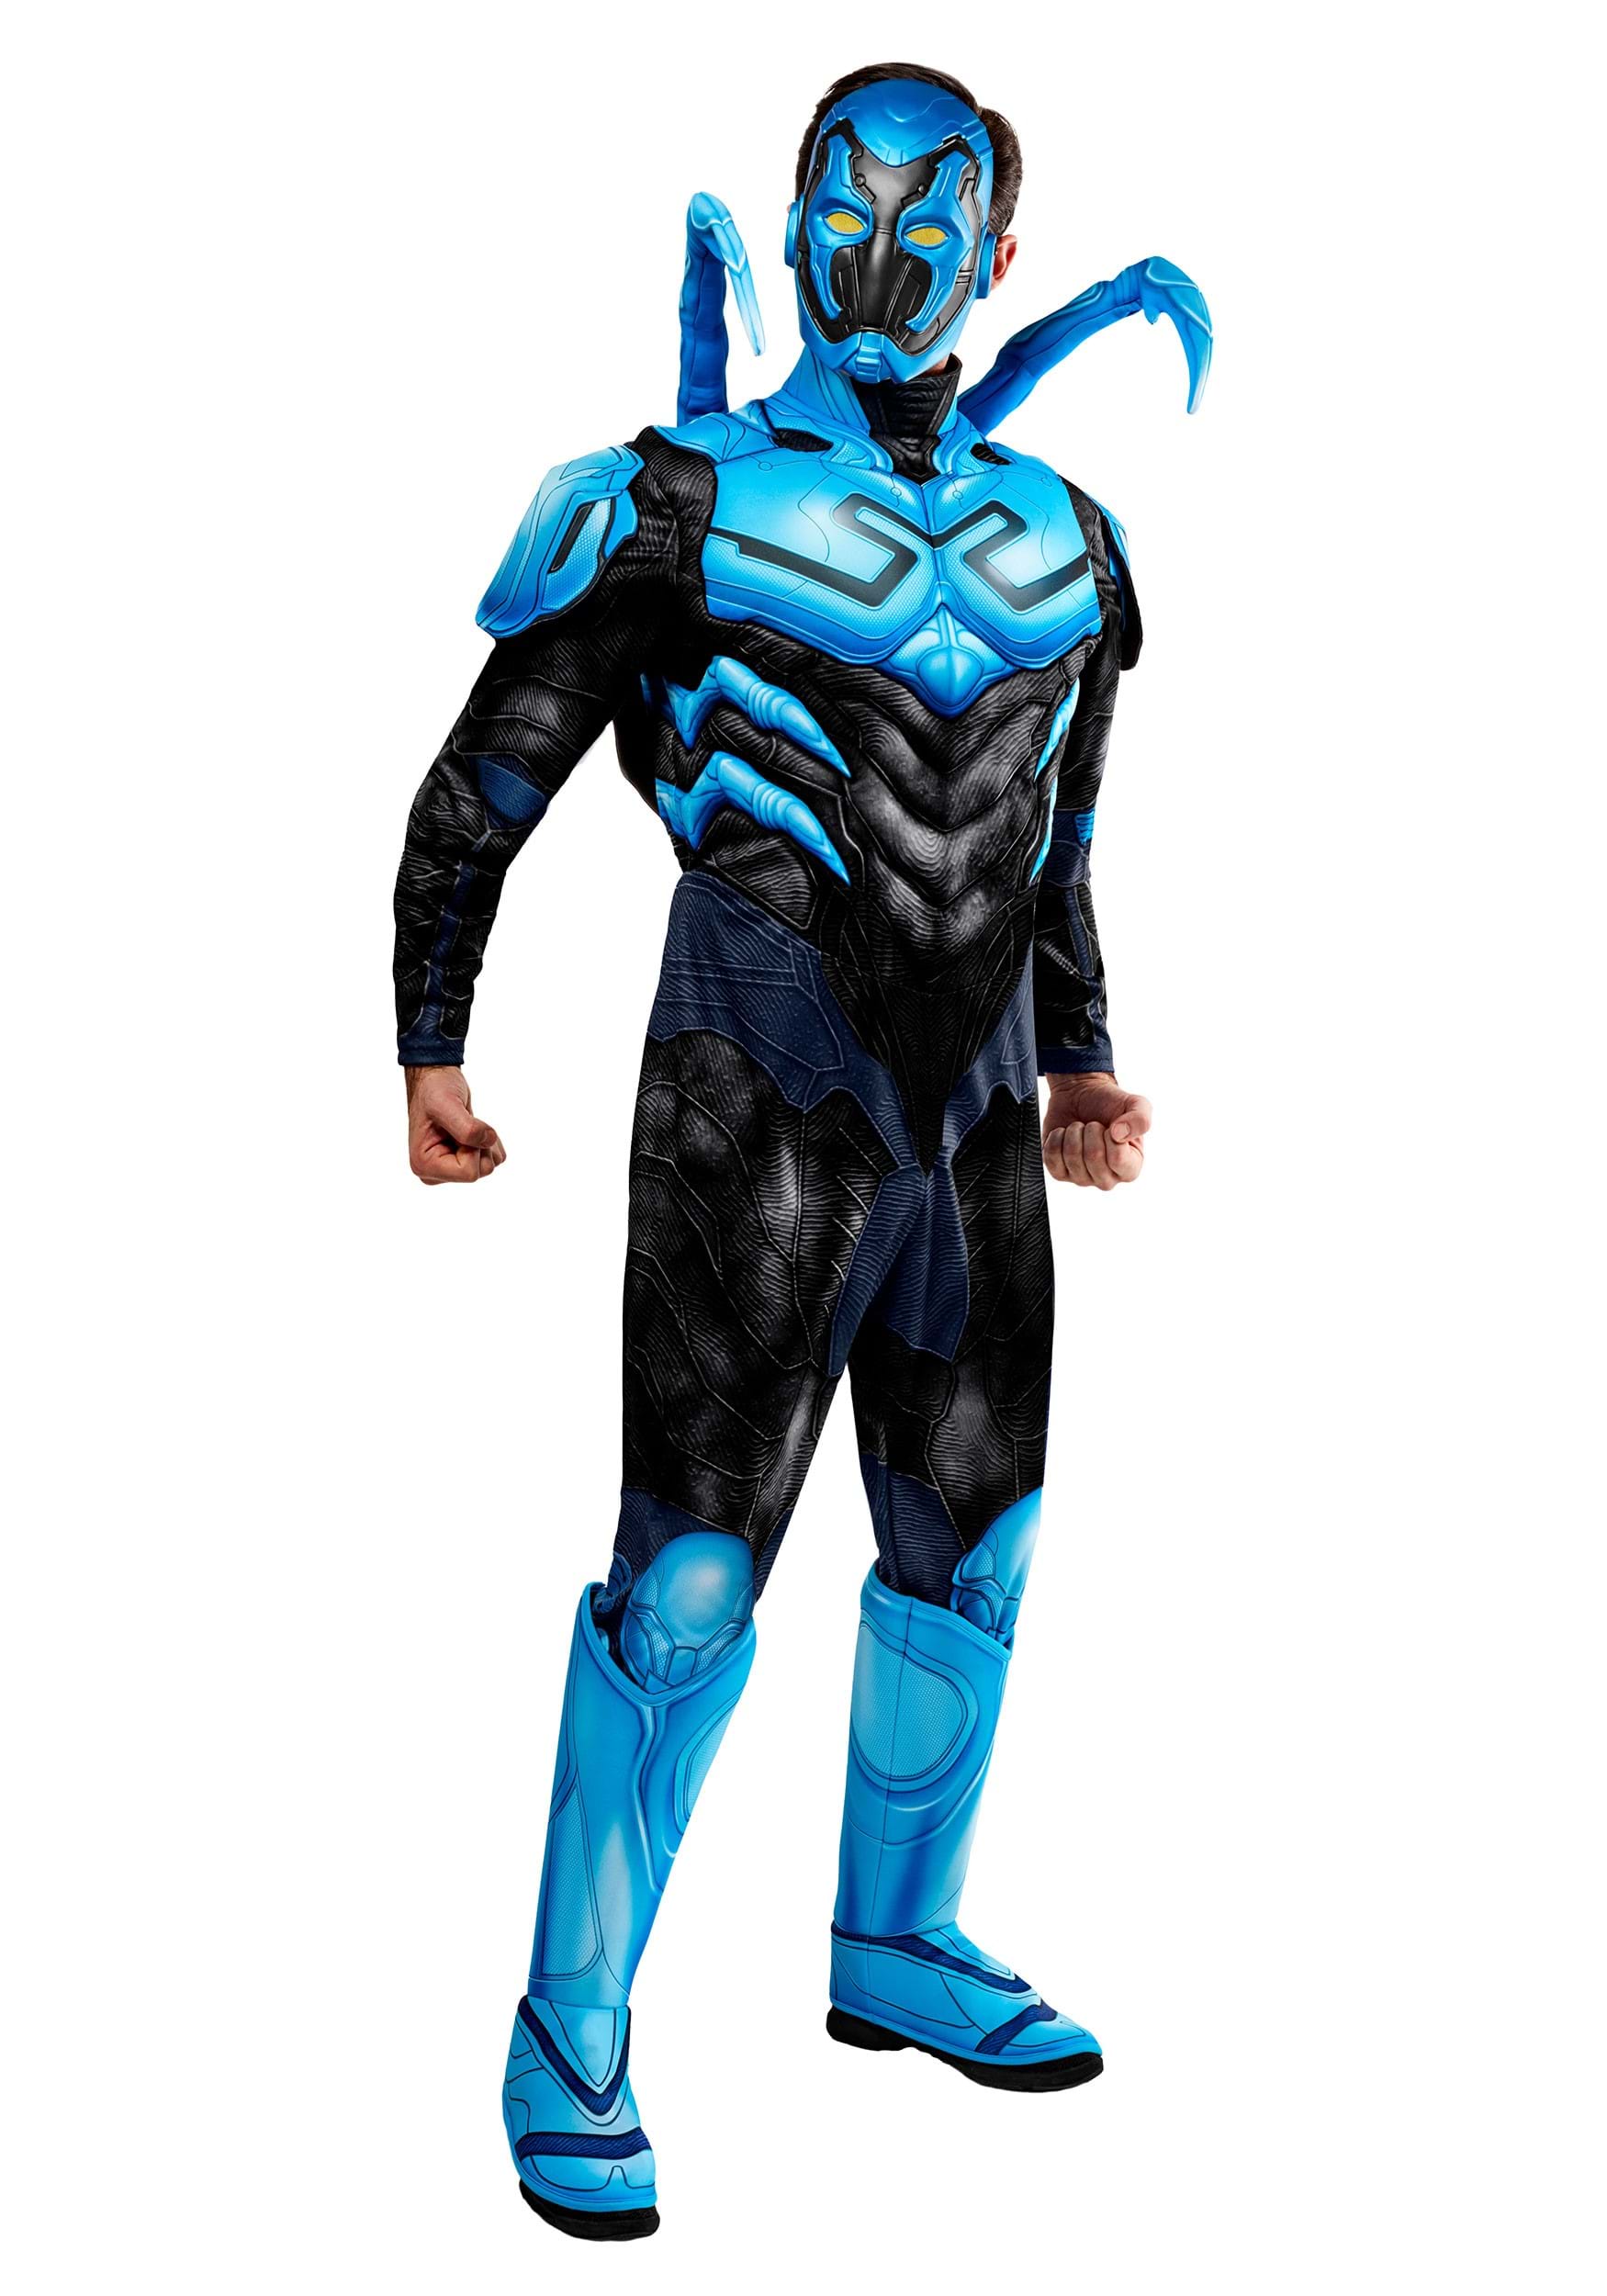 https://images.halloweencostumes.com/products/93062/1-1/blue-beetle-mens-deluxe-costume.jpg